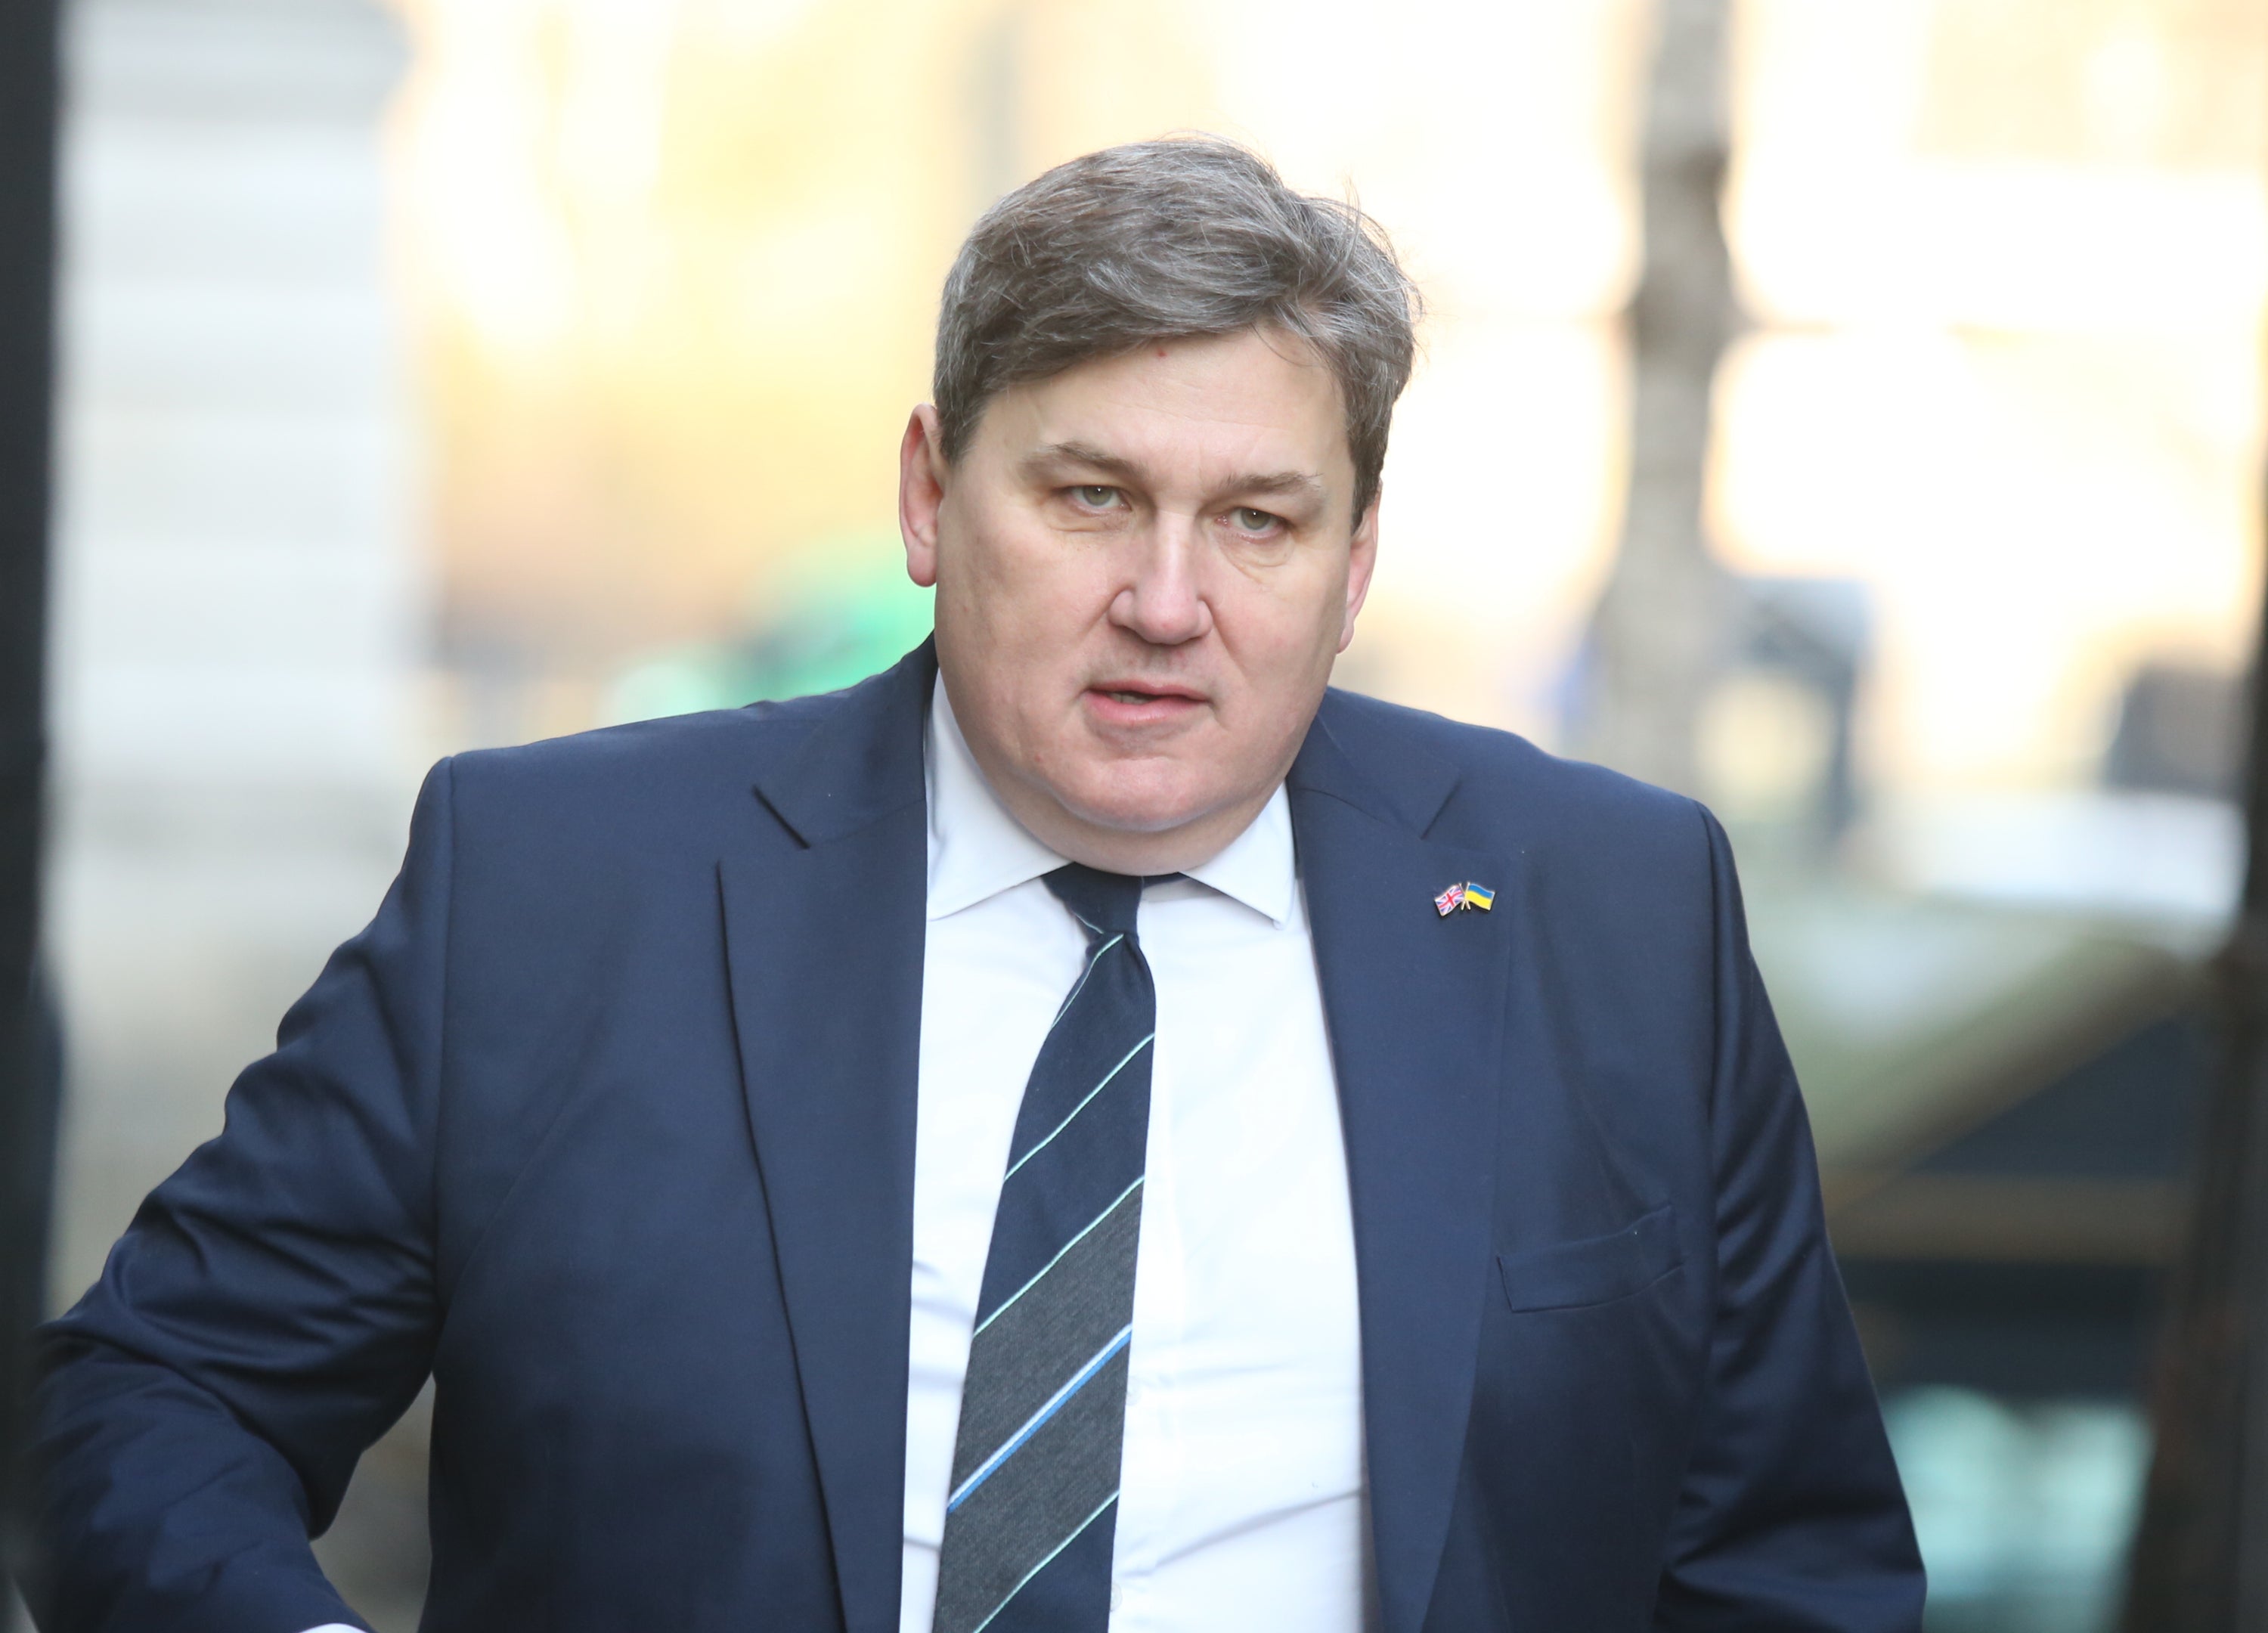 Crime and policing minister Kit Malthouse said county lines drug dealing is one of the most destructive forms of criminality in the UK (James Manning/PA)